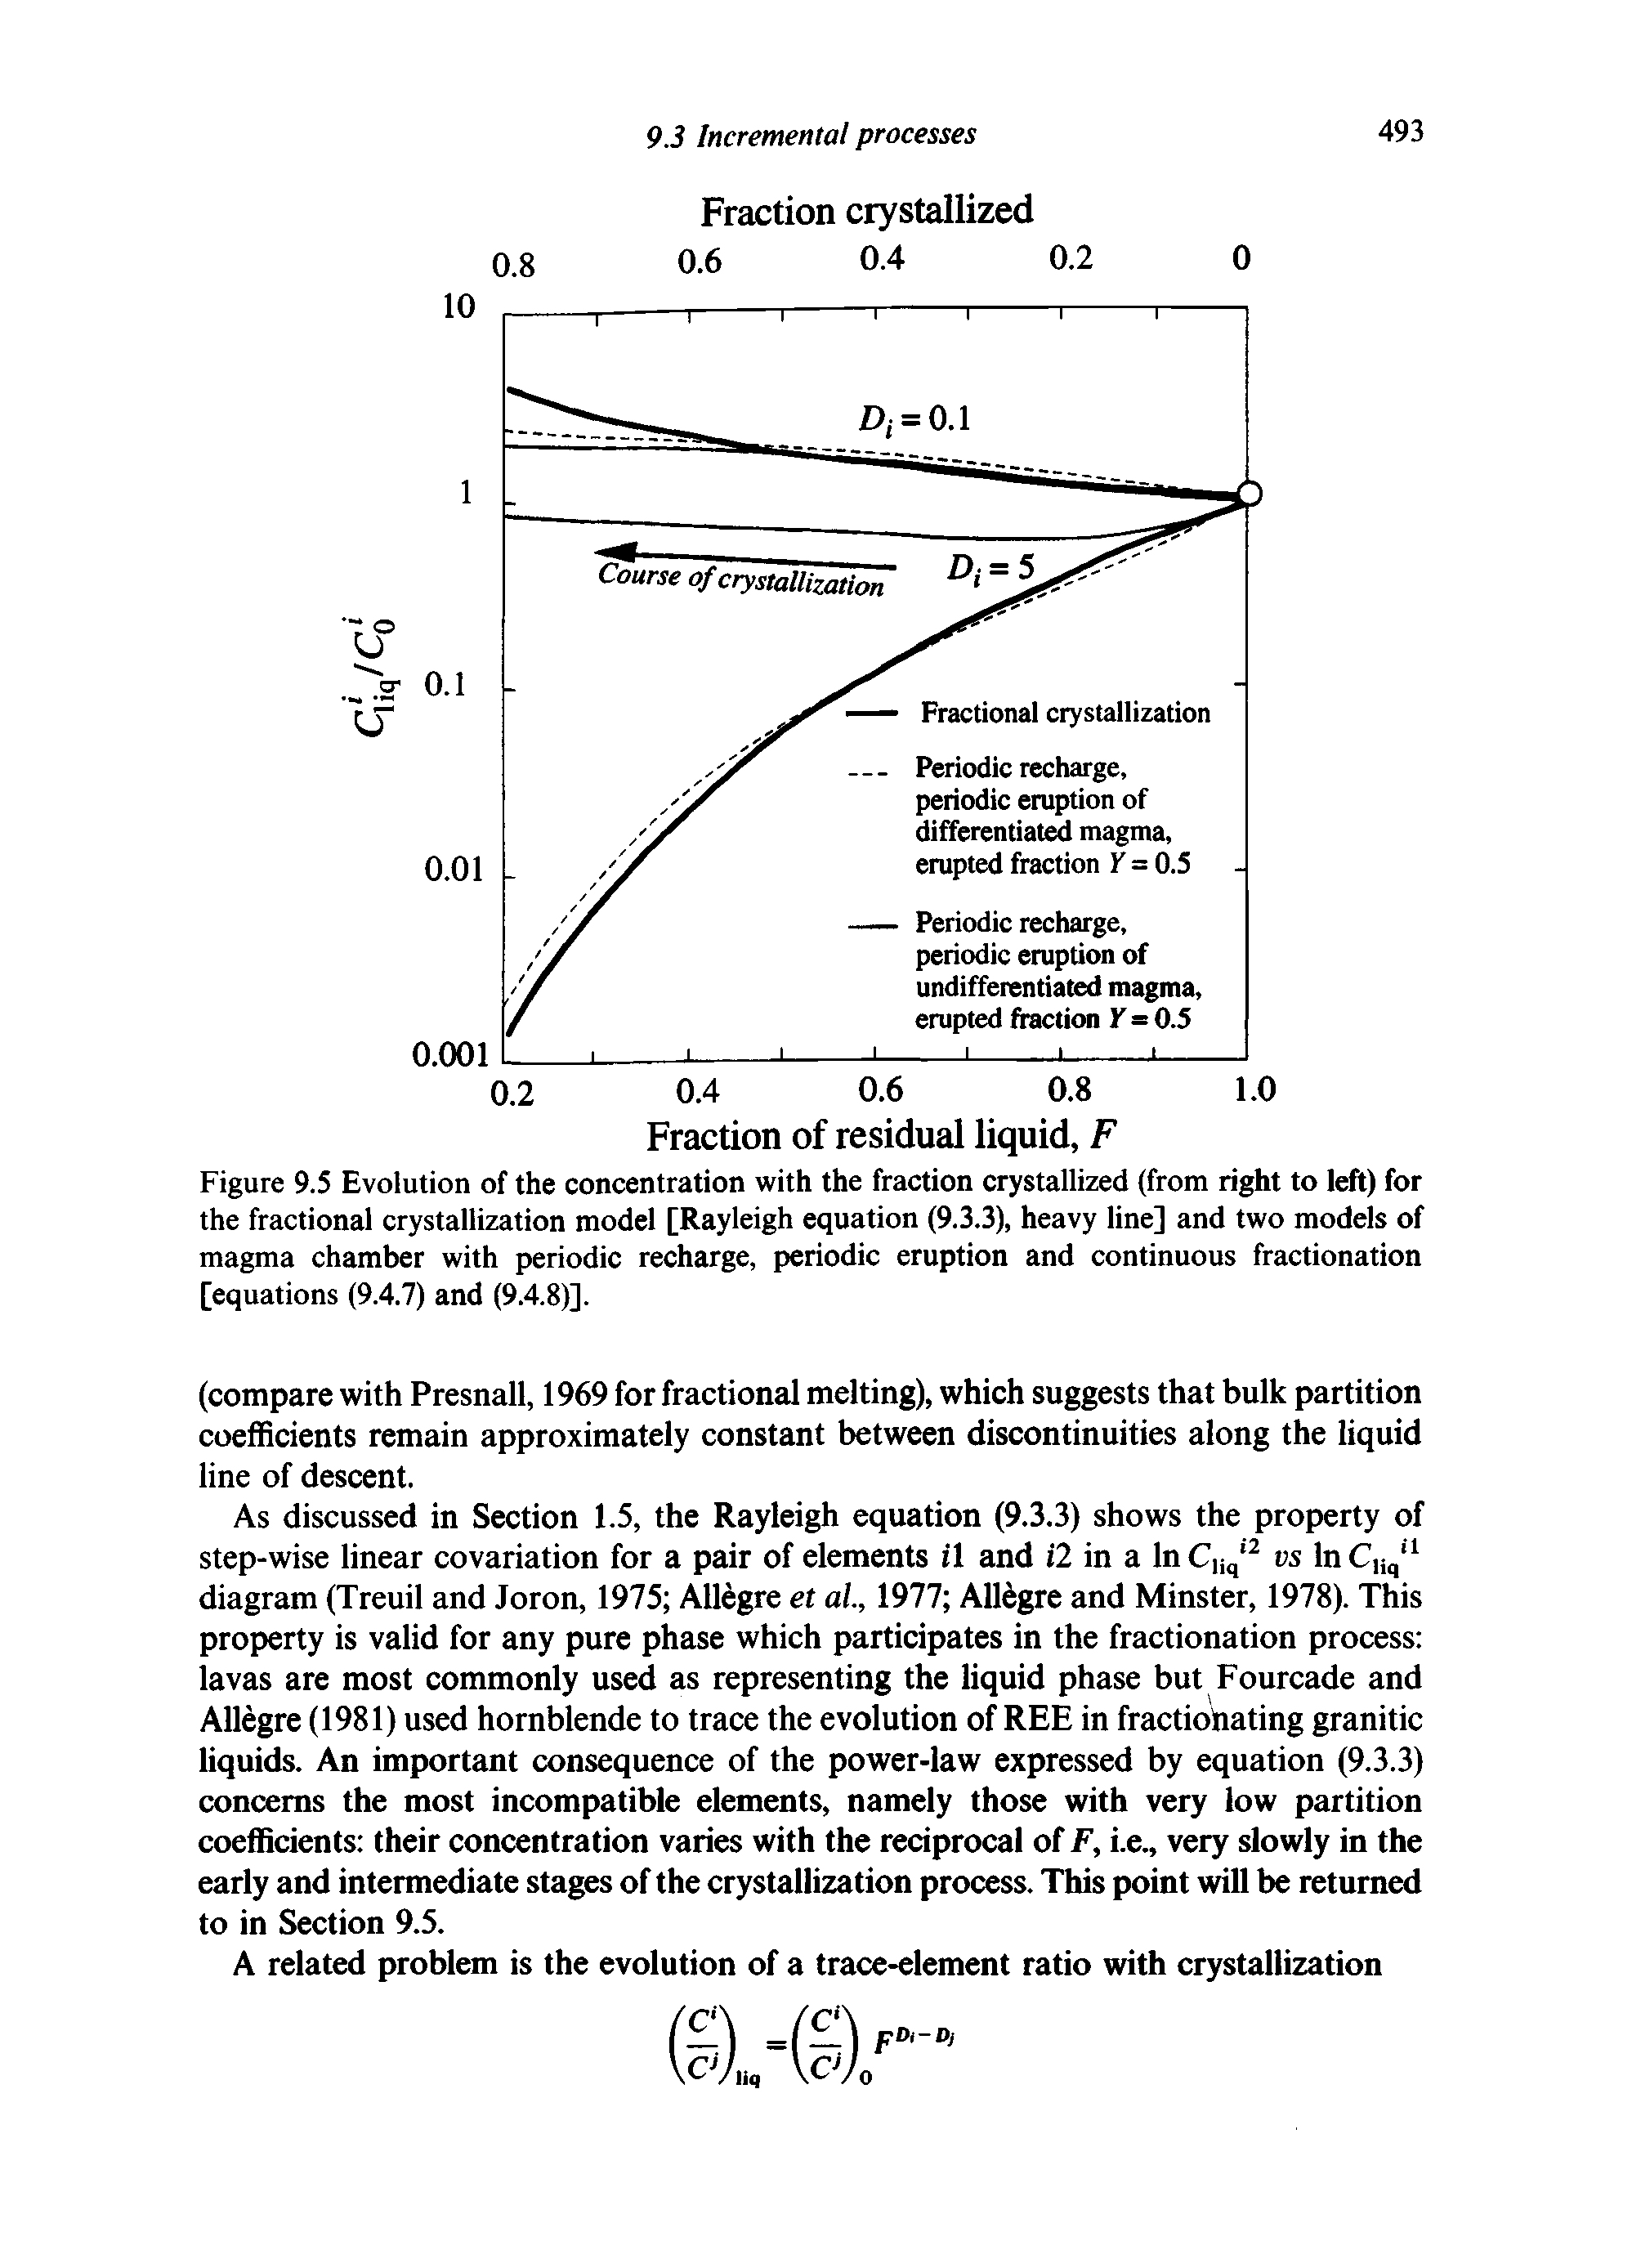 Figure 9.5 Evolution of the concentration with the fraction crystallized (from right to left) for the fractional crystallization model [Rayleigh equation (9.3.3), heavy line] and two models of magma chamber with periodic recharge, periodic eruption and continuous fractionation [equations (9.4.7) and (9.4.8)].